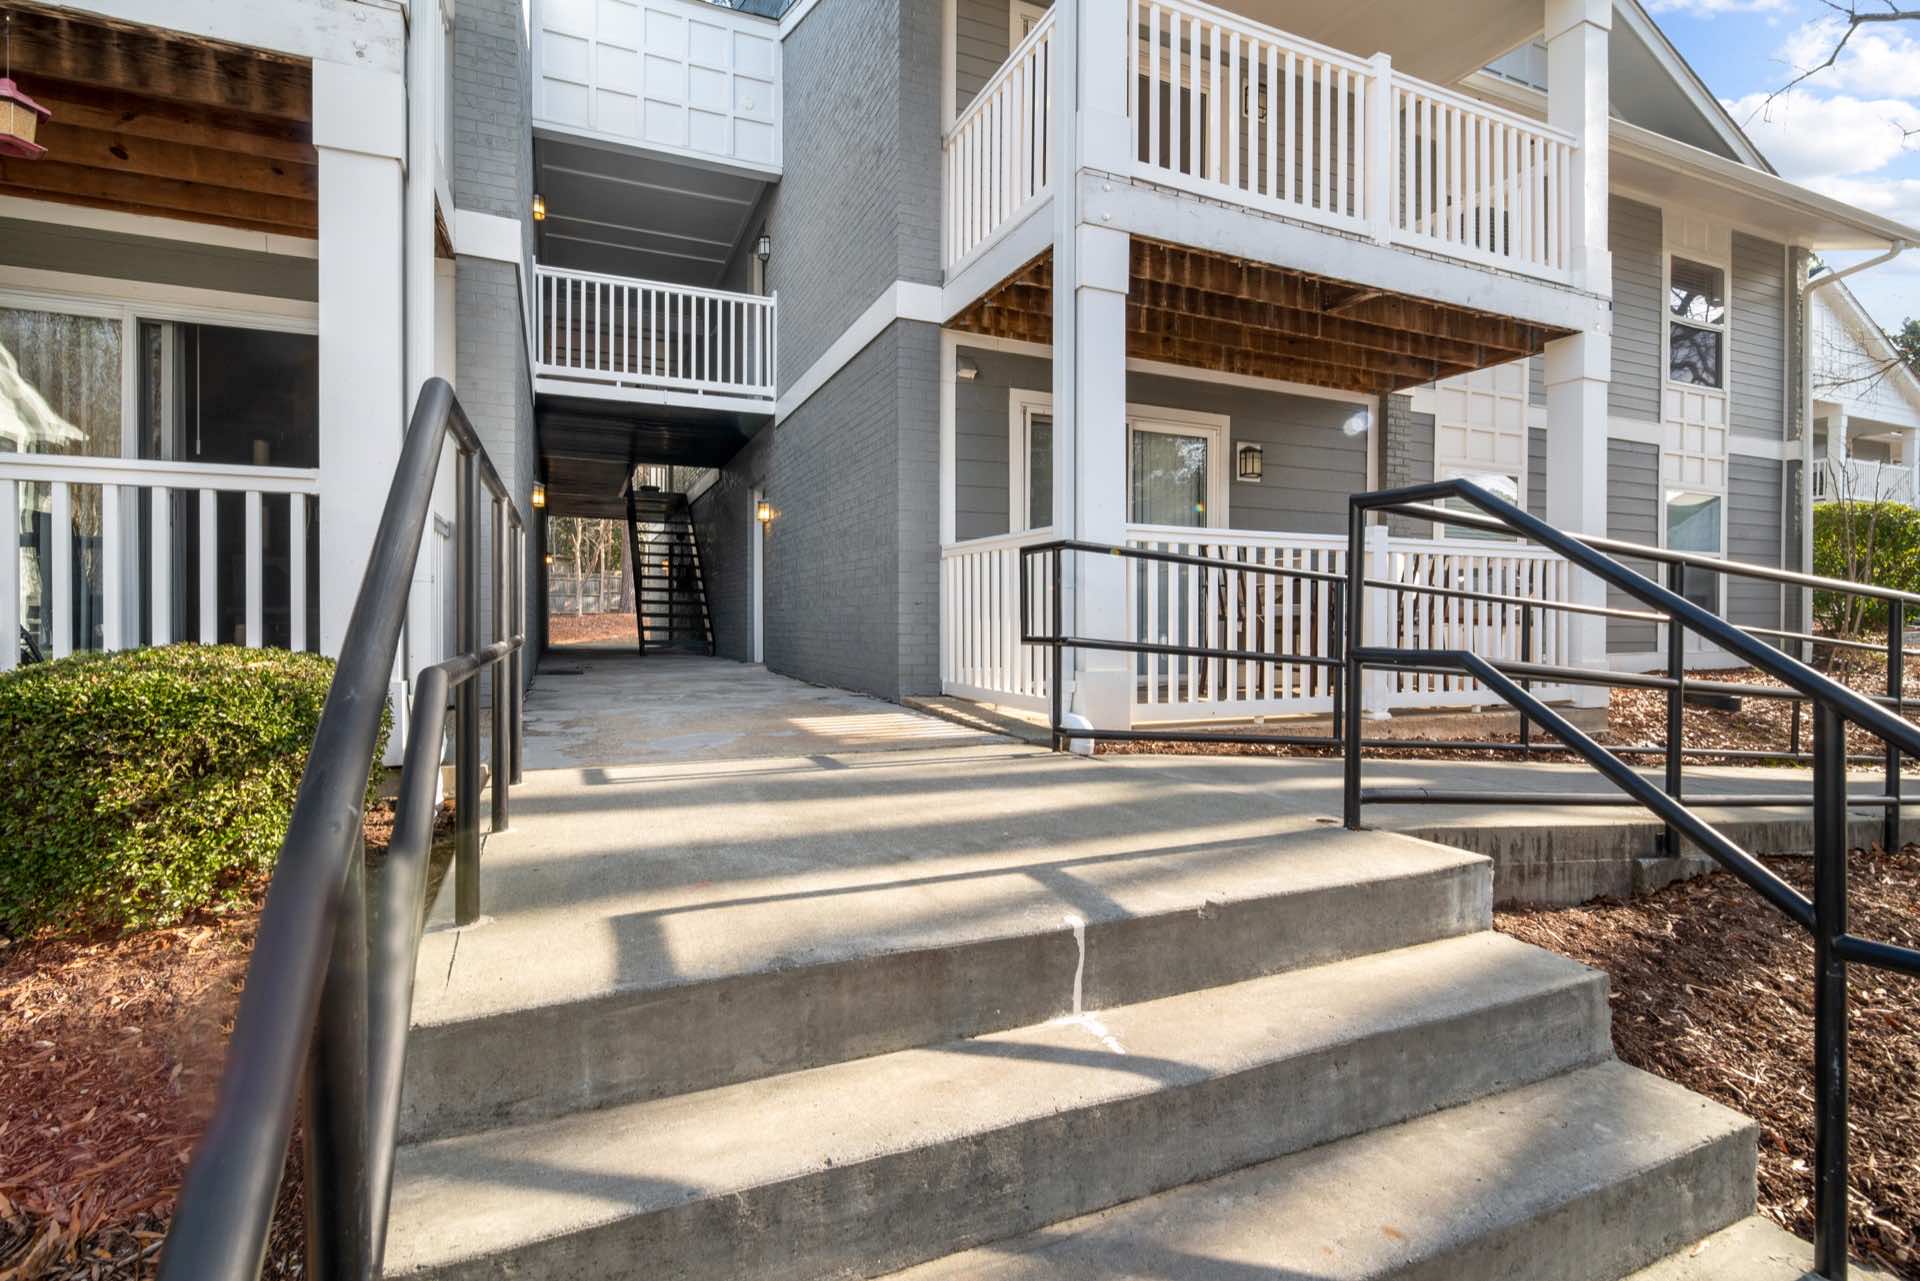 accessible sidewalk to apartment entrance